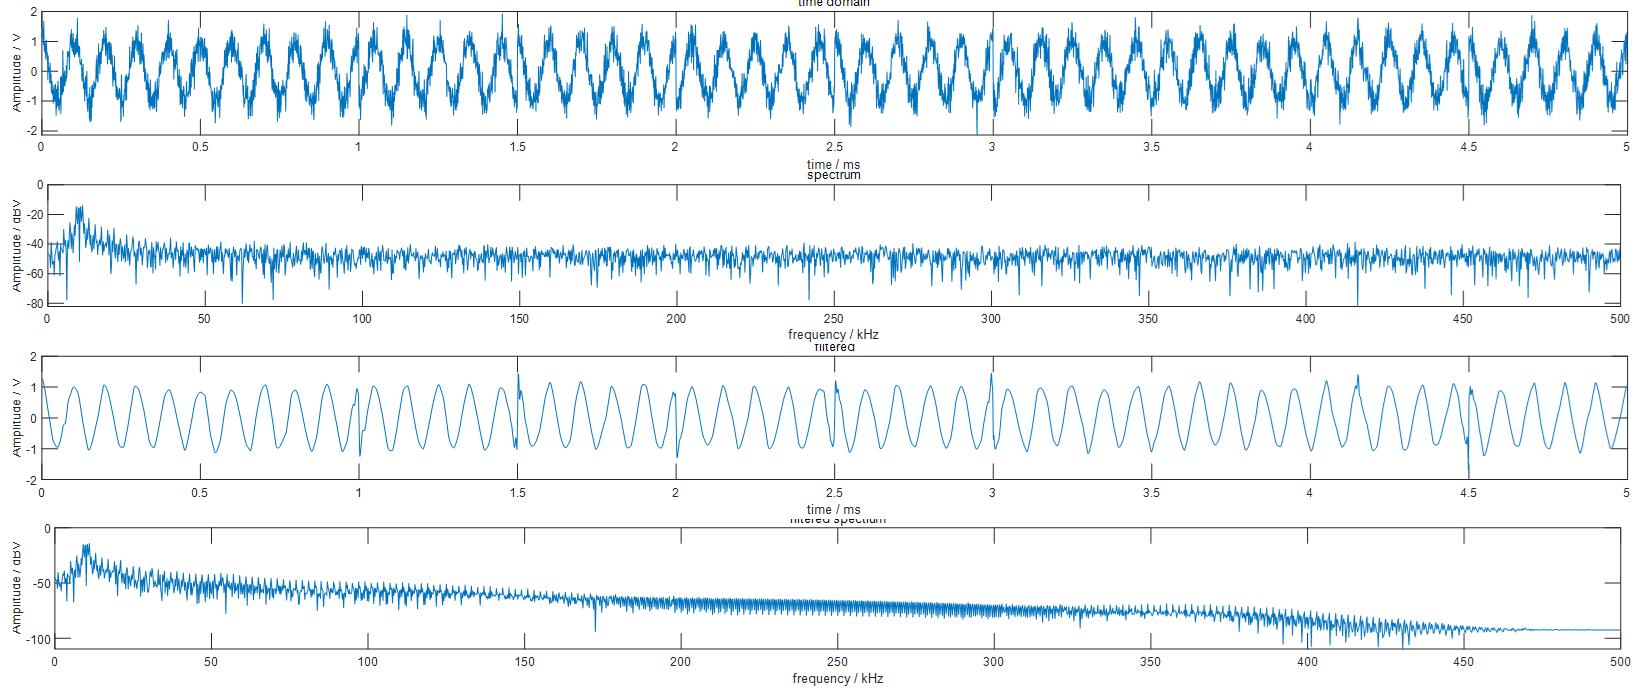 Noisy Modulated BPSK signal and wavelet denoised Modulated BPSK signal